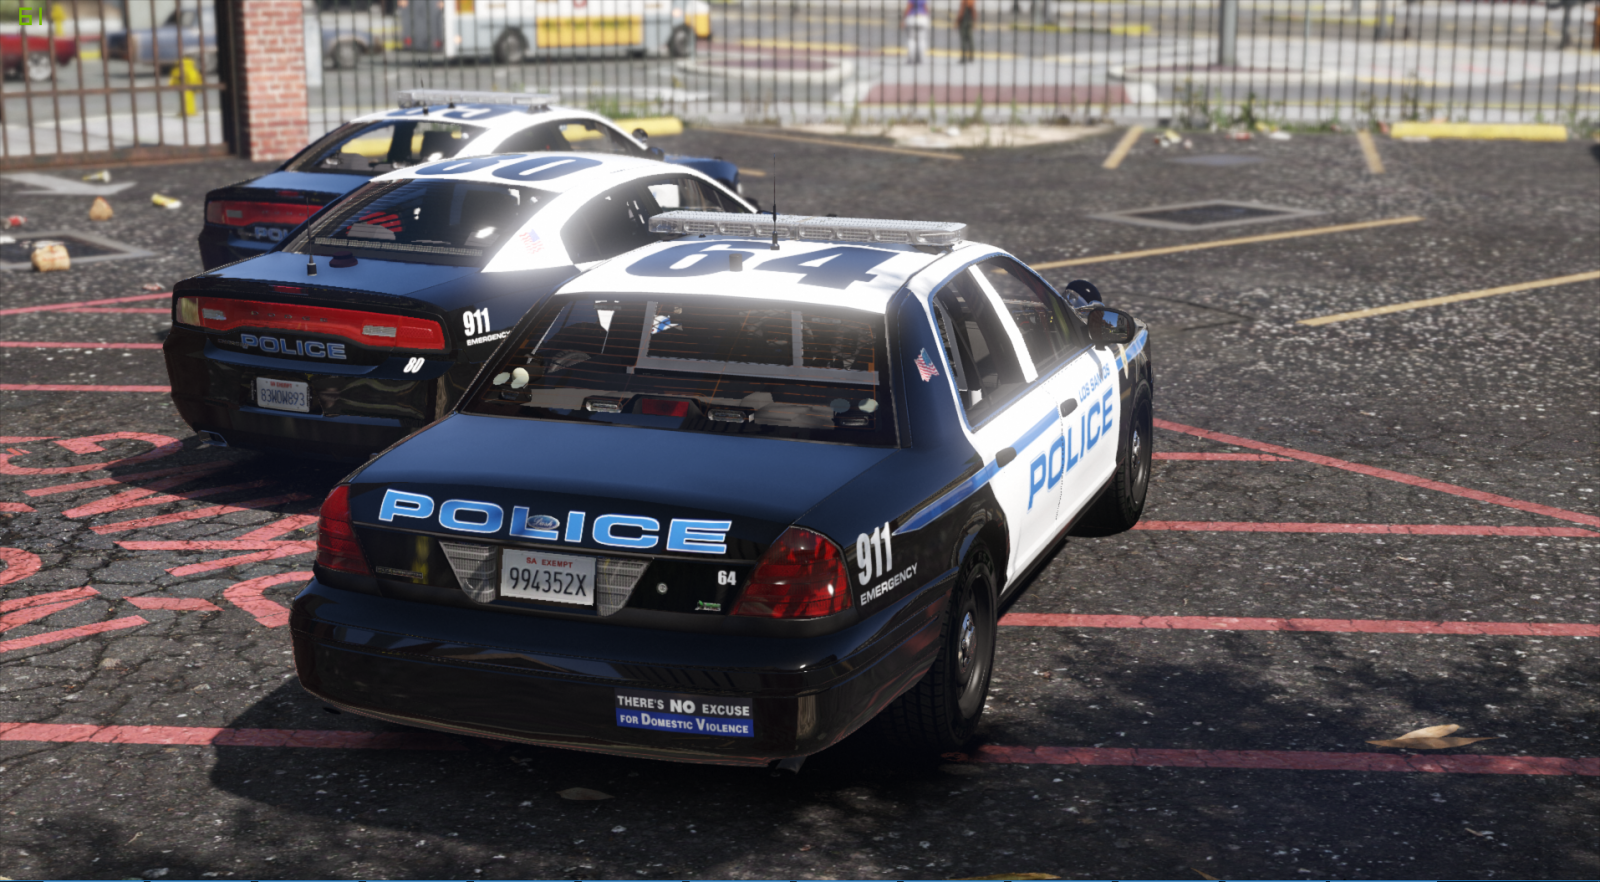 LSPD Based on Barstow Police Department